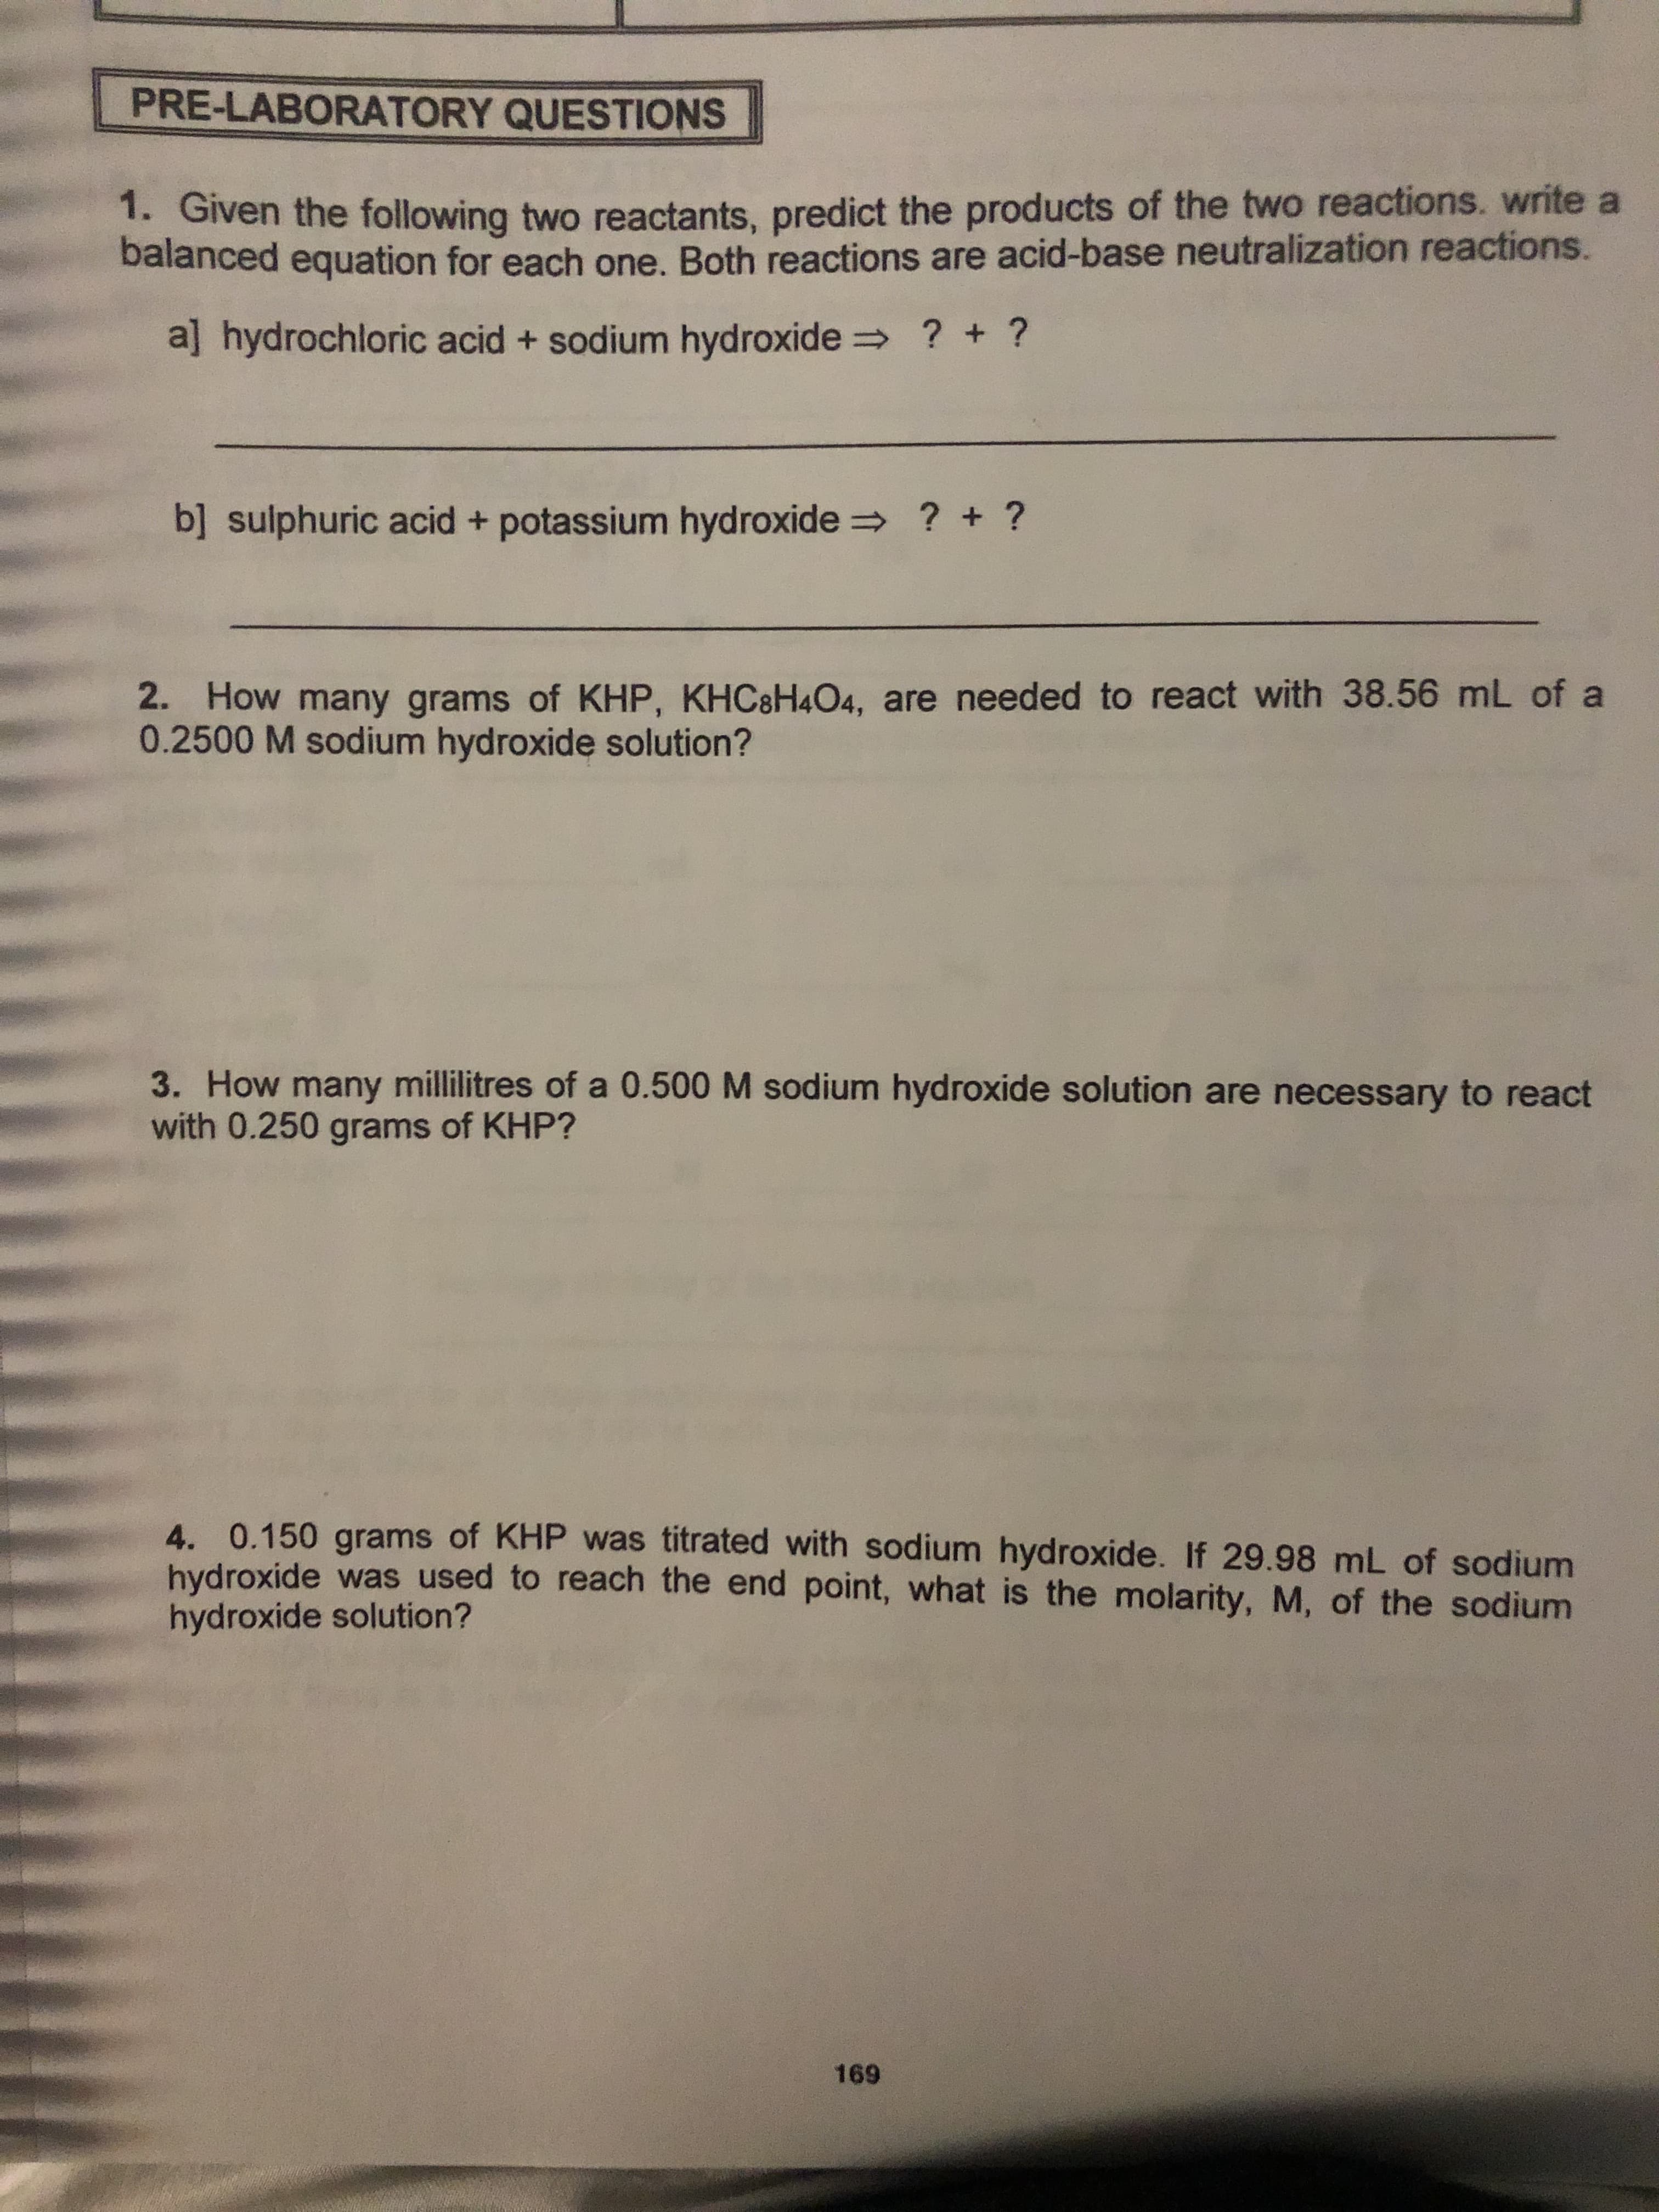 PRE-LABORATORY QUESTIONS
1. Given the following two reactants, predict the products of the two reactions. write a
balanced equation for each one. Both reactions are acid-base neutralization reactions.
? + ?
aj hydrochloric acid + sodium hydroxide
b] sulphuric acid + potassium hydroxide ? +?
2. How many grams of KHP, KHC8H404, are needed to react with 38.56 mL of a
0.2500 M sodium hydroxide solution?
3. How many millilitres of a 0.500 M sodium hydroxide solution are necessary to react
with 0.250 grams of KHP?
4. 0.150 grams of KHP was titrated with sodium hydroxide. If 29.98 mL of sodium
hydroxide was used to reach the end point, what is the molarity, M, of the sodium
hydroxide solution?
169
